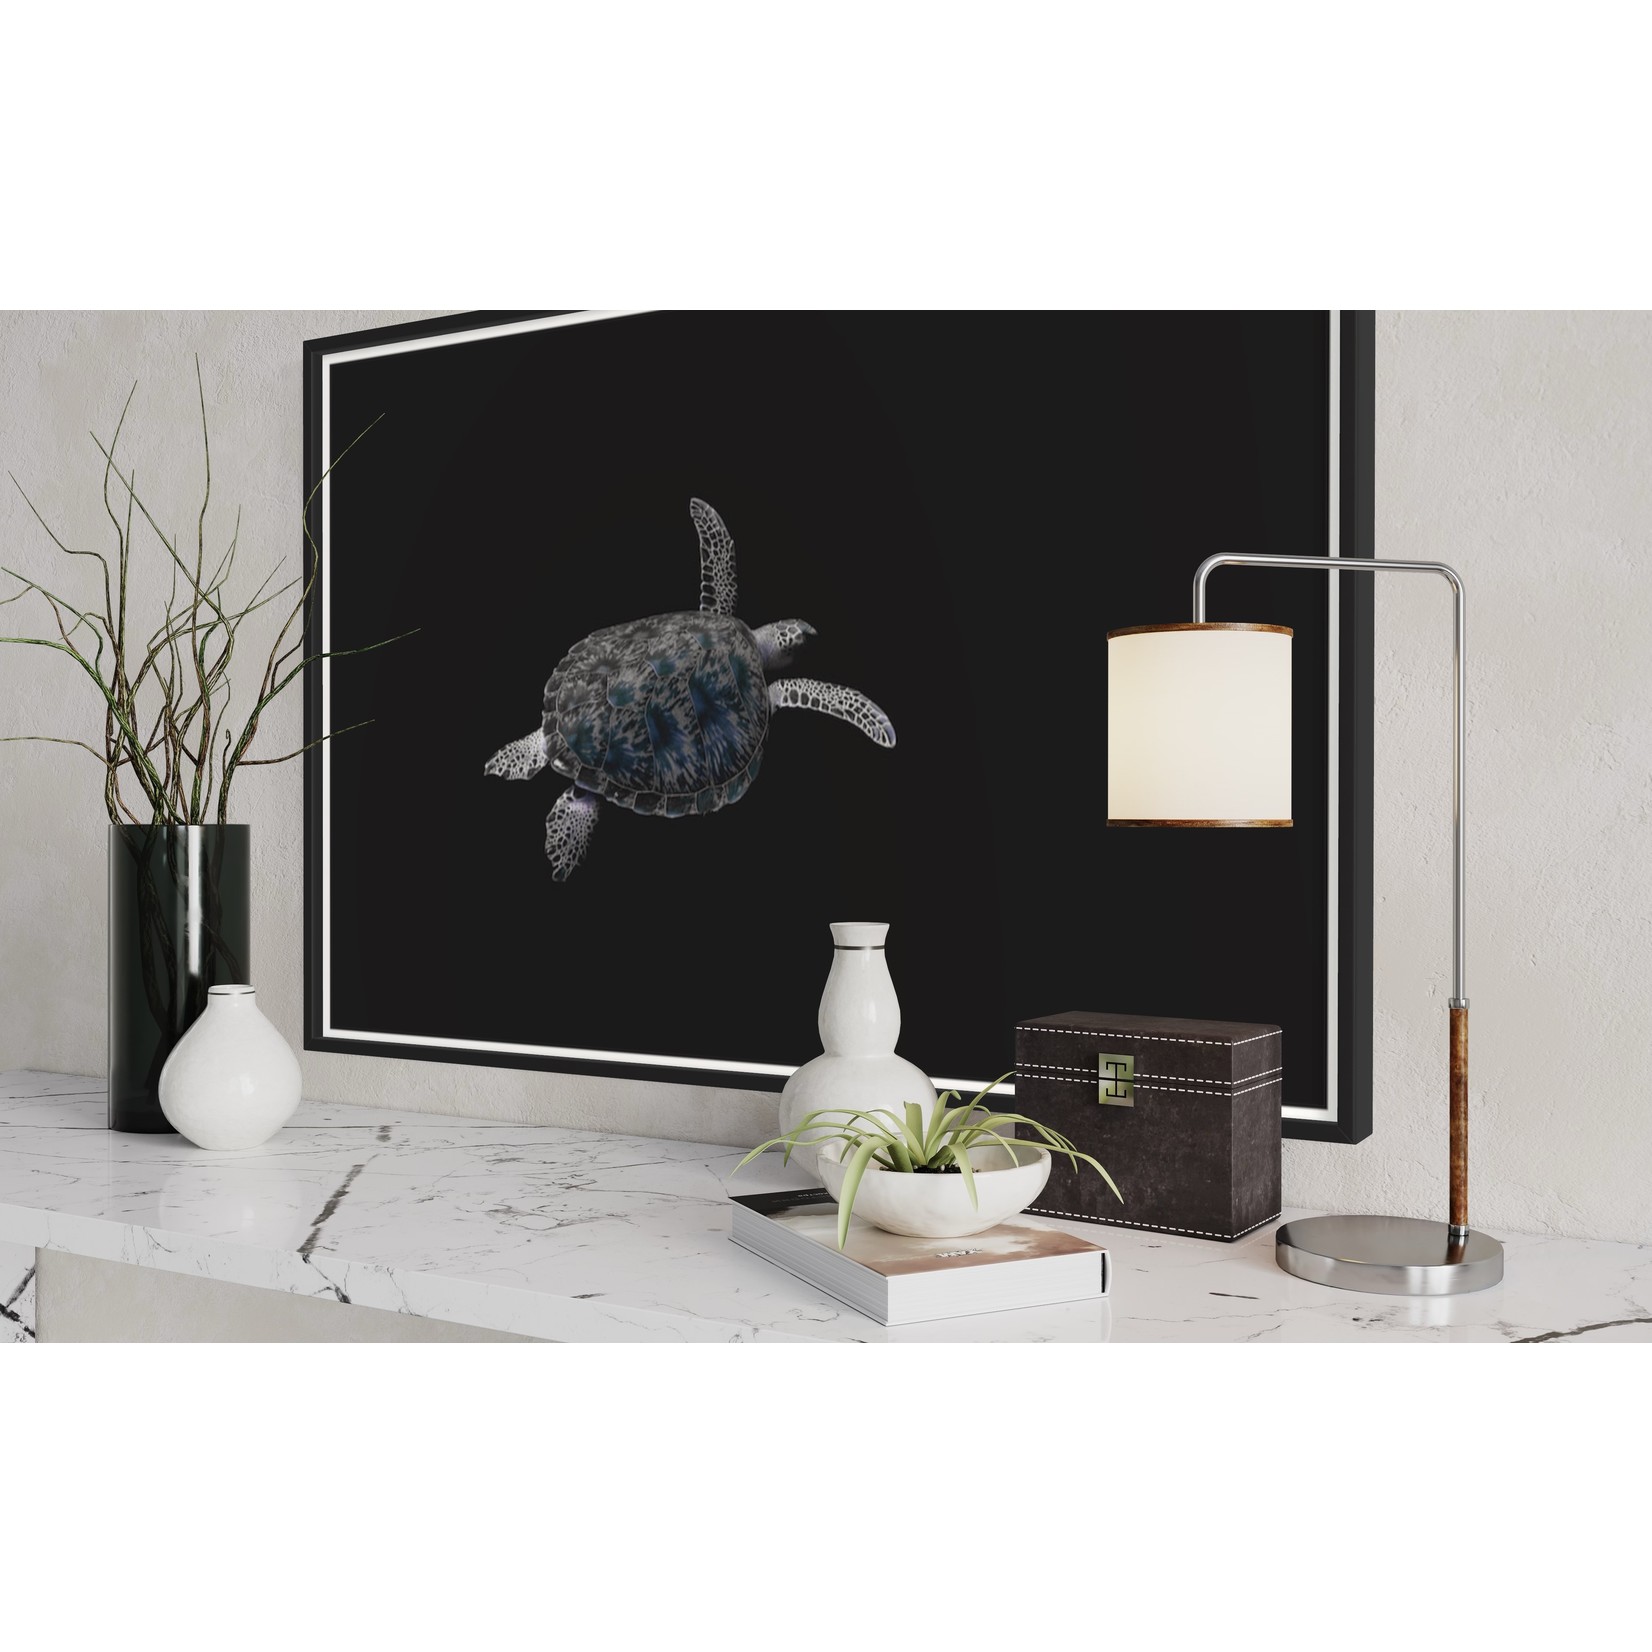 The Picturalist | Fine Art Print on Rag Paper Carey Turtle by Enric Gener